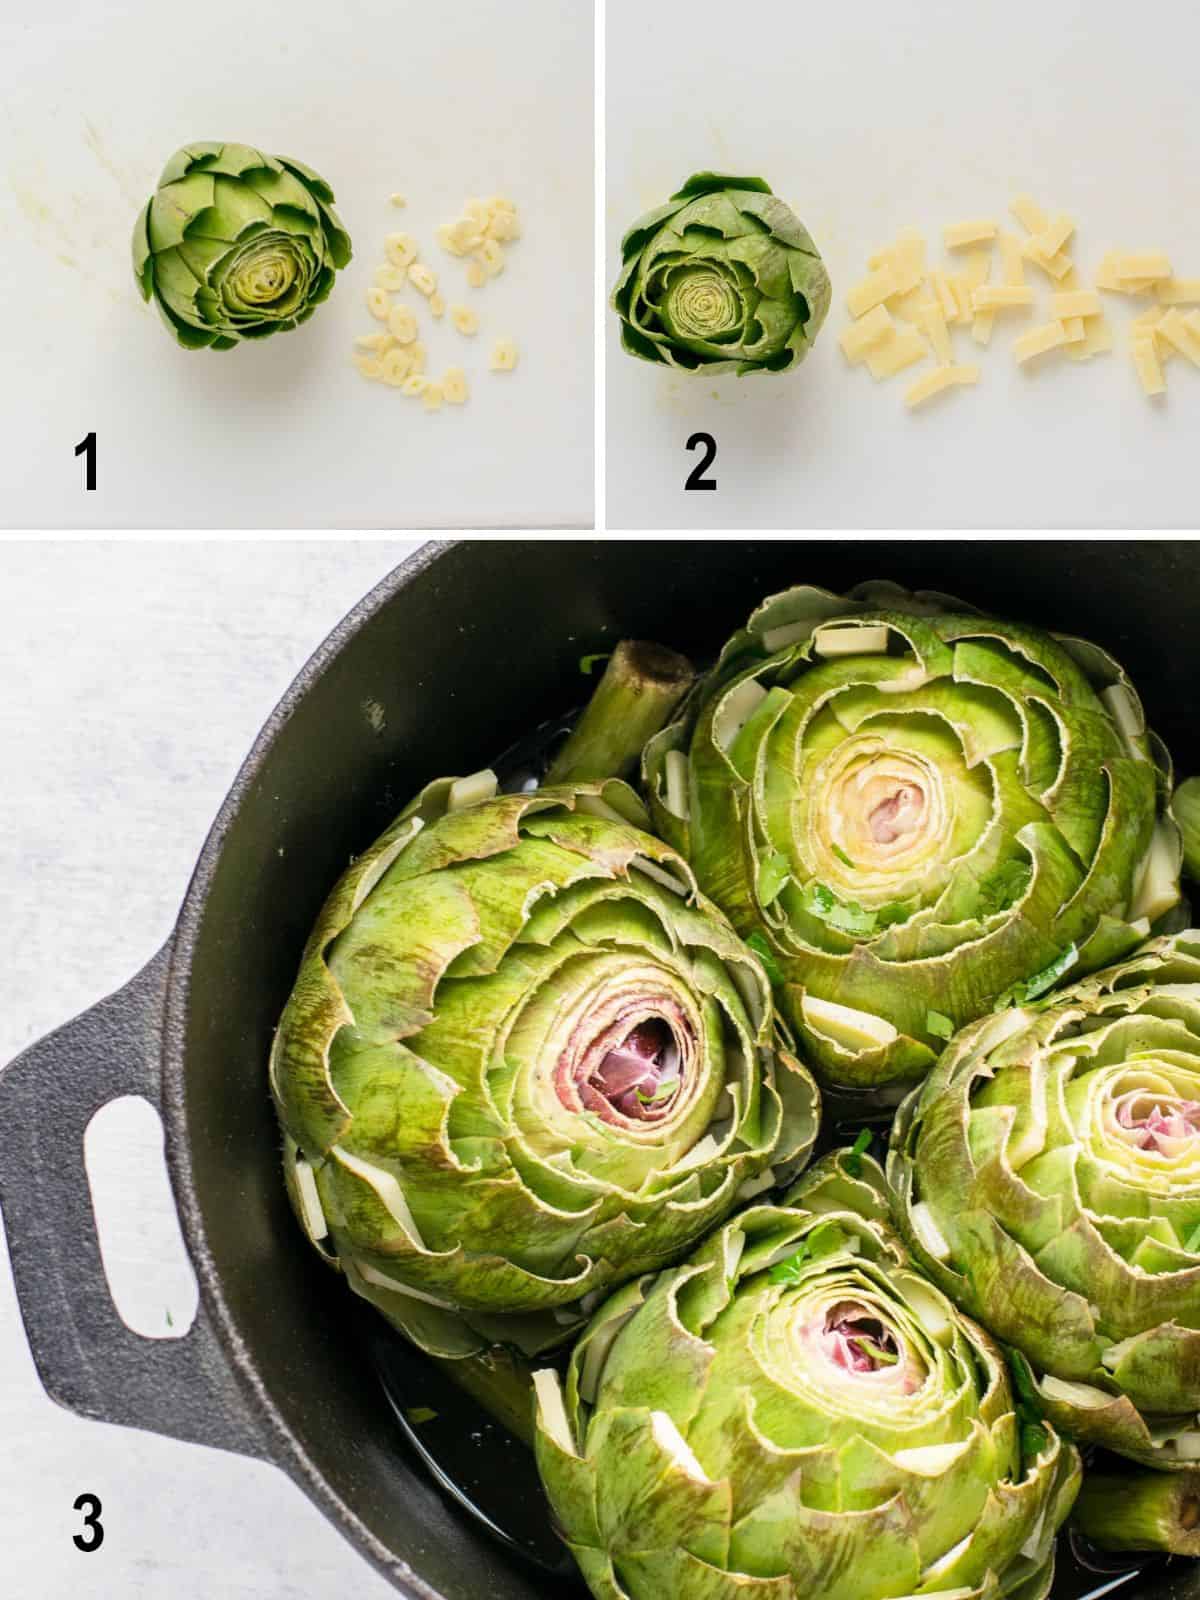 artichoke with garlic slices, pieces of cheese, stuffed artichokes in pot